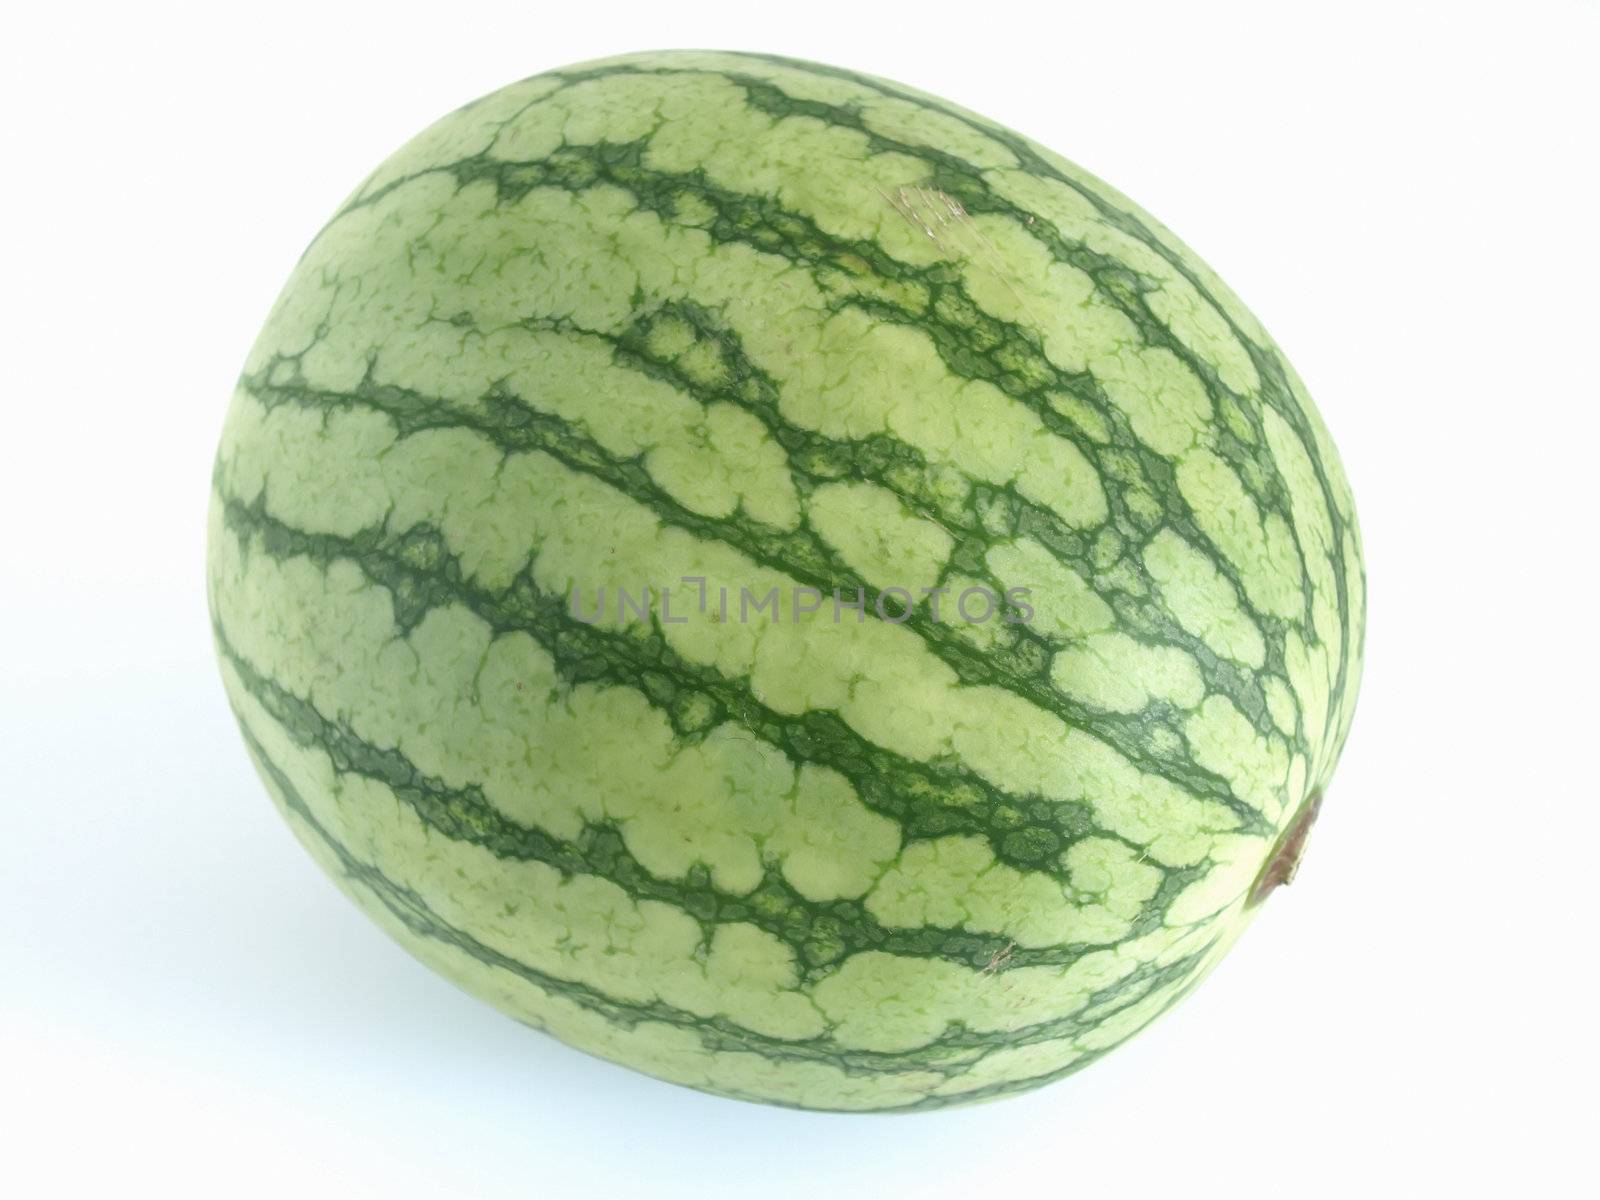 An isolated green watermelon studio isolated against a white background.